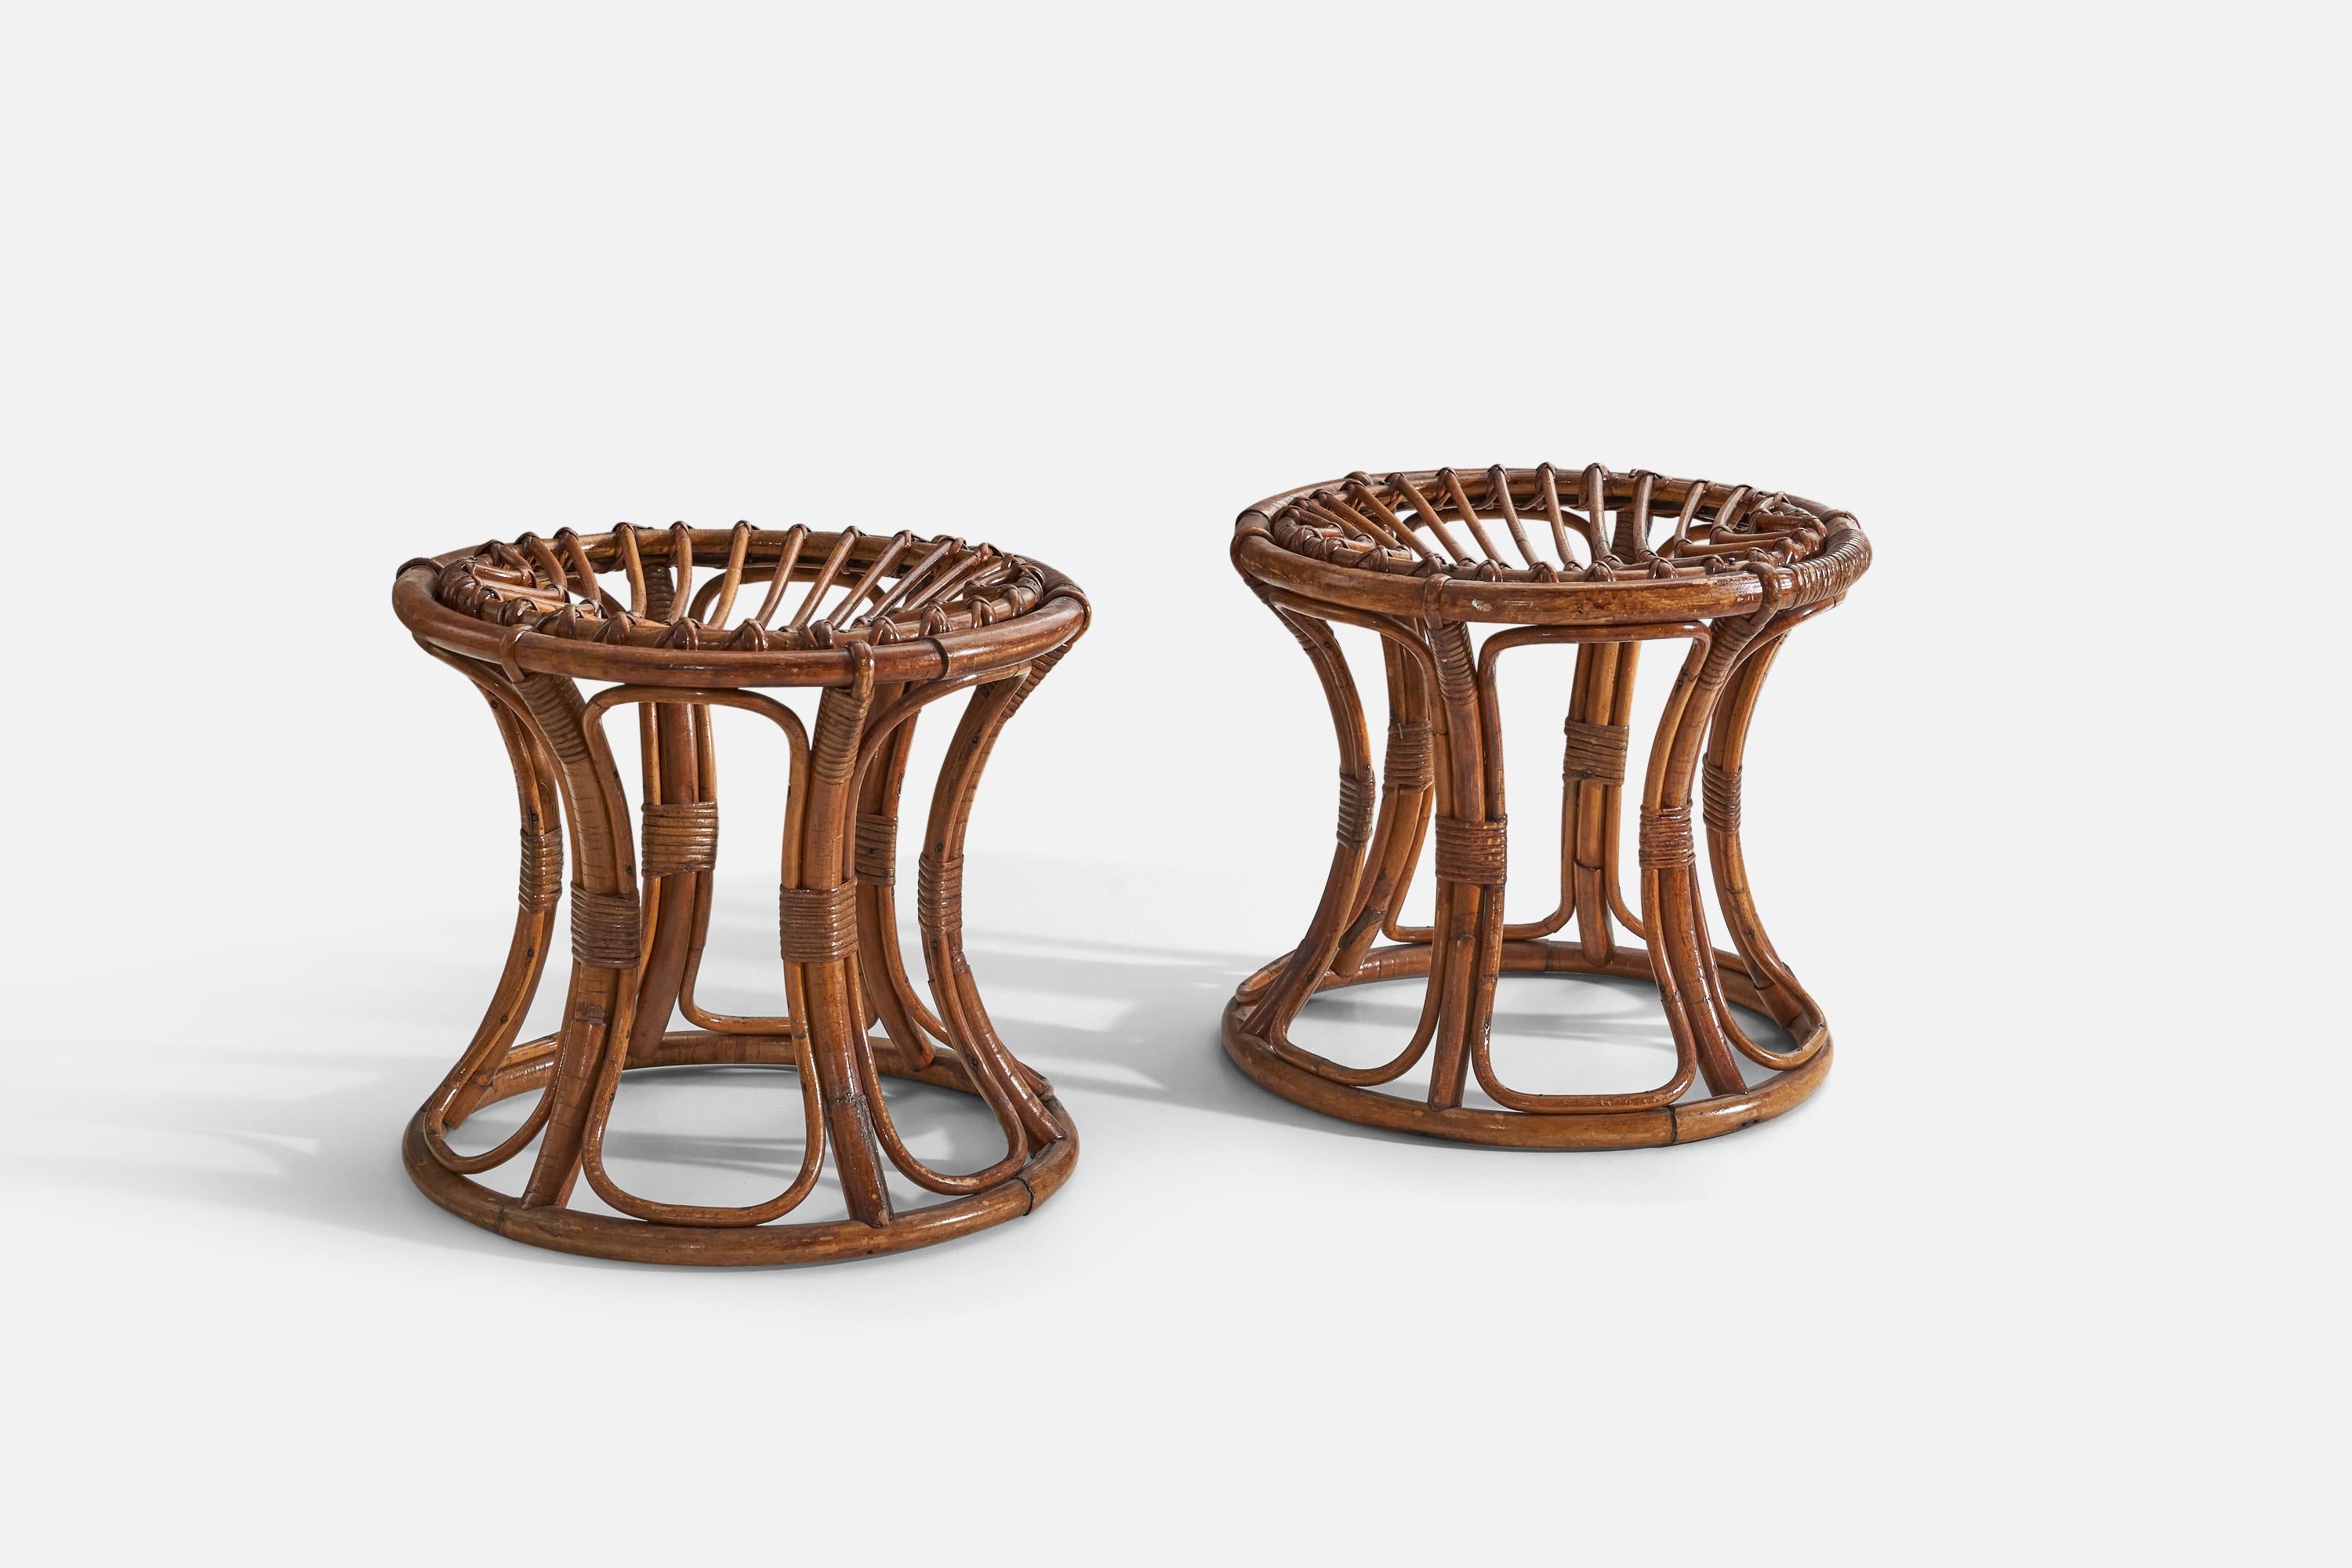 A pair of rattan stools designed and produced in Italy, c. 1950s. 

